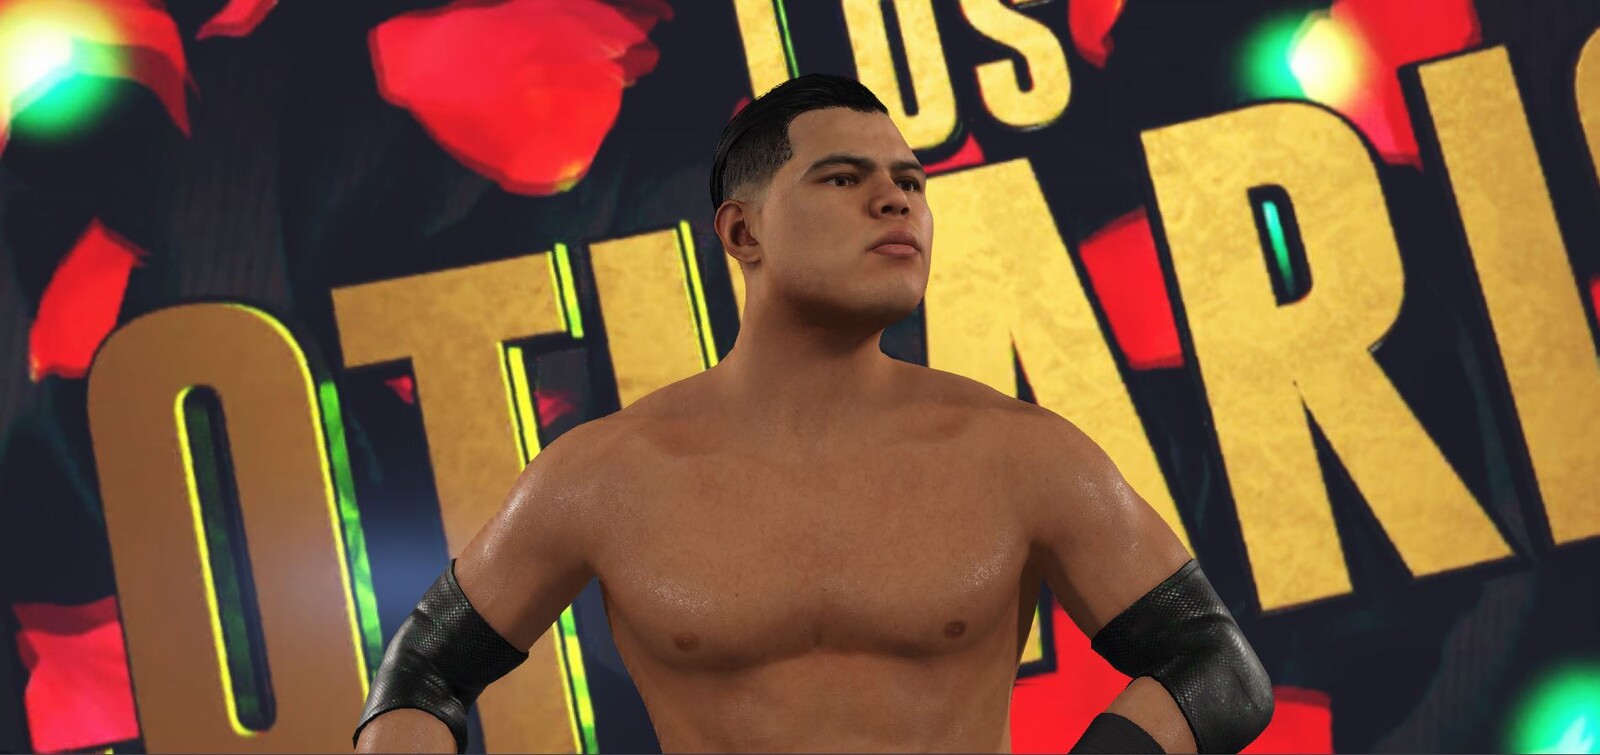 Humberto Carillo, as seen on their 2019 WWE TLC Kickoff match